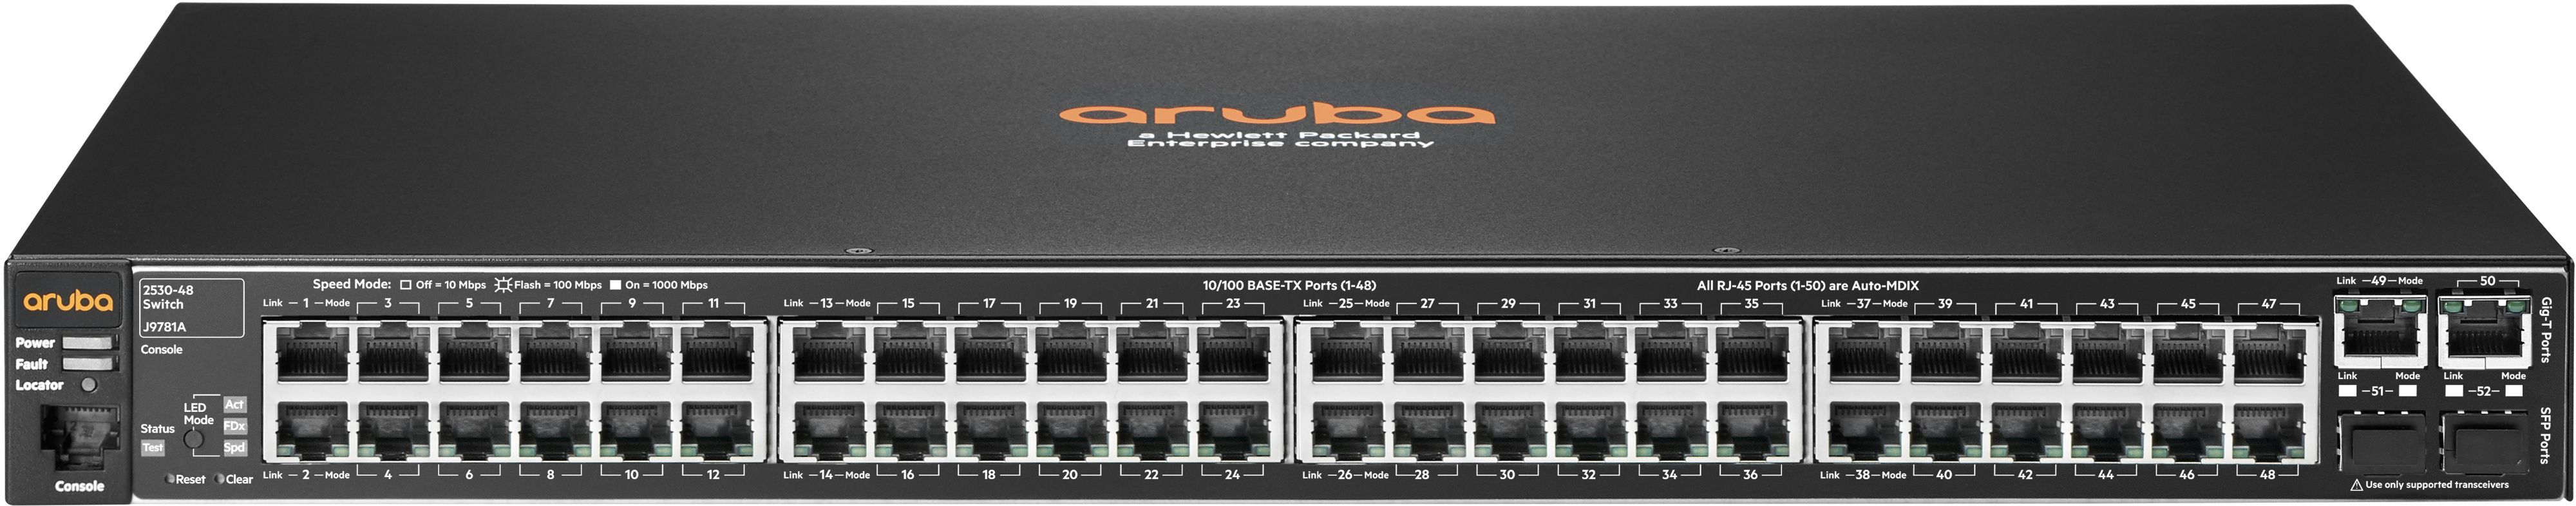 HPE 2530-48 Switch